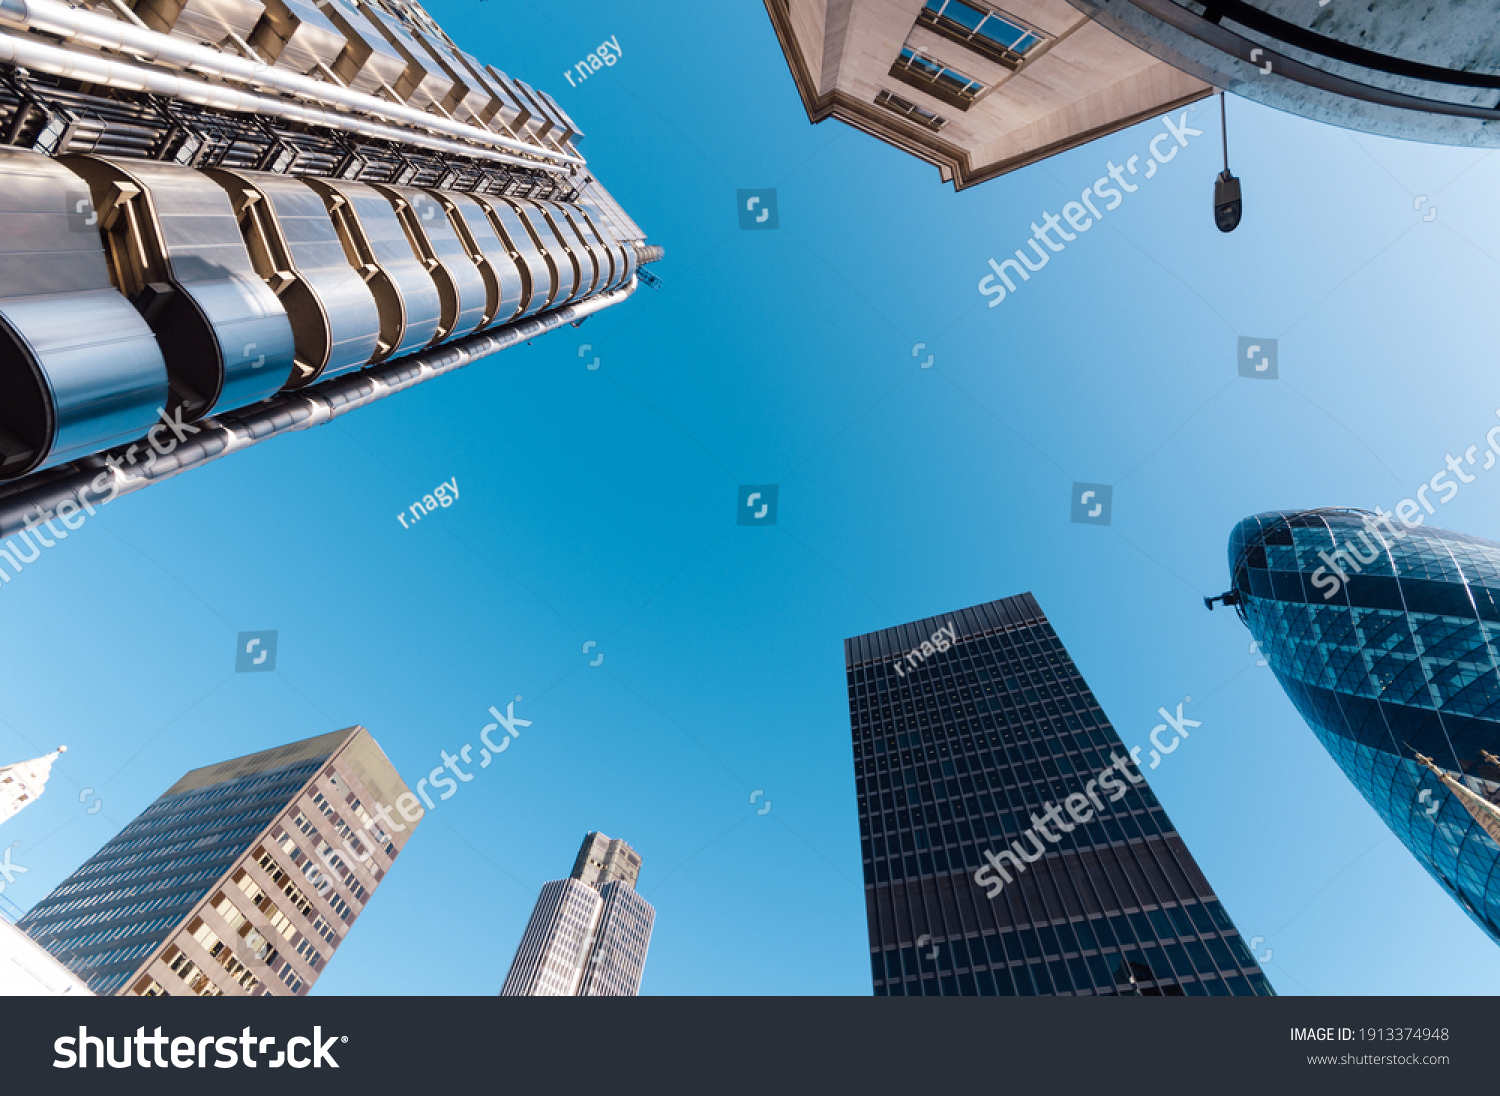 Looking directly up at the skyline of the financial district in the City of London #1913374948